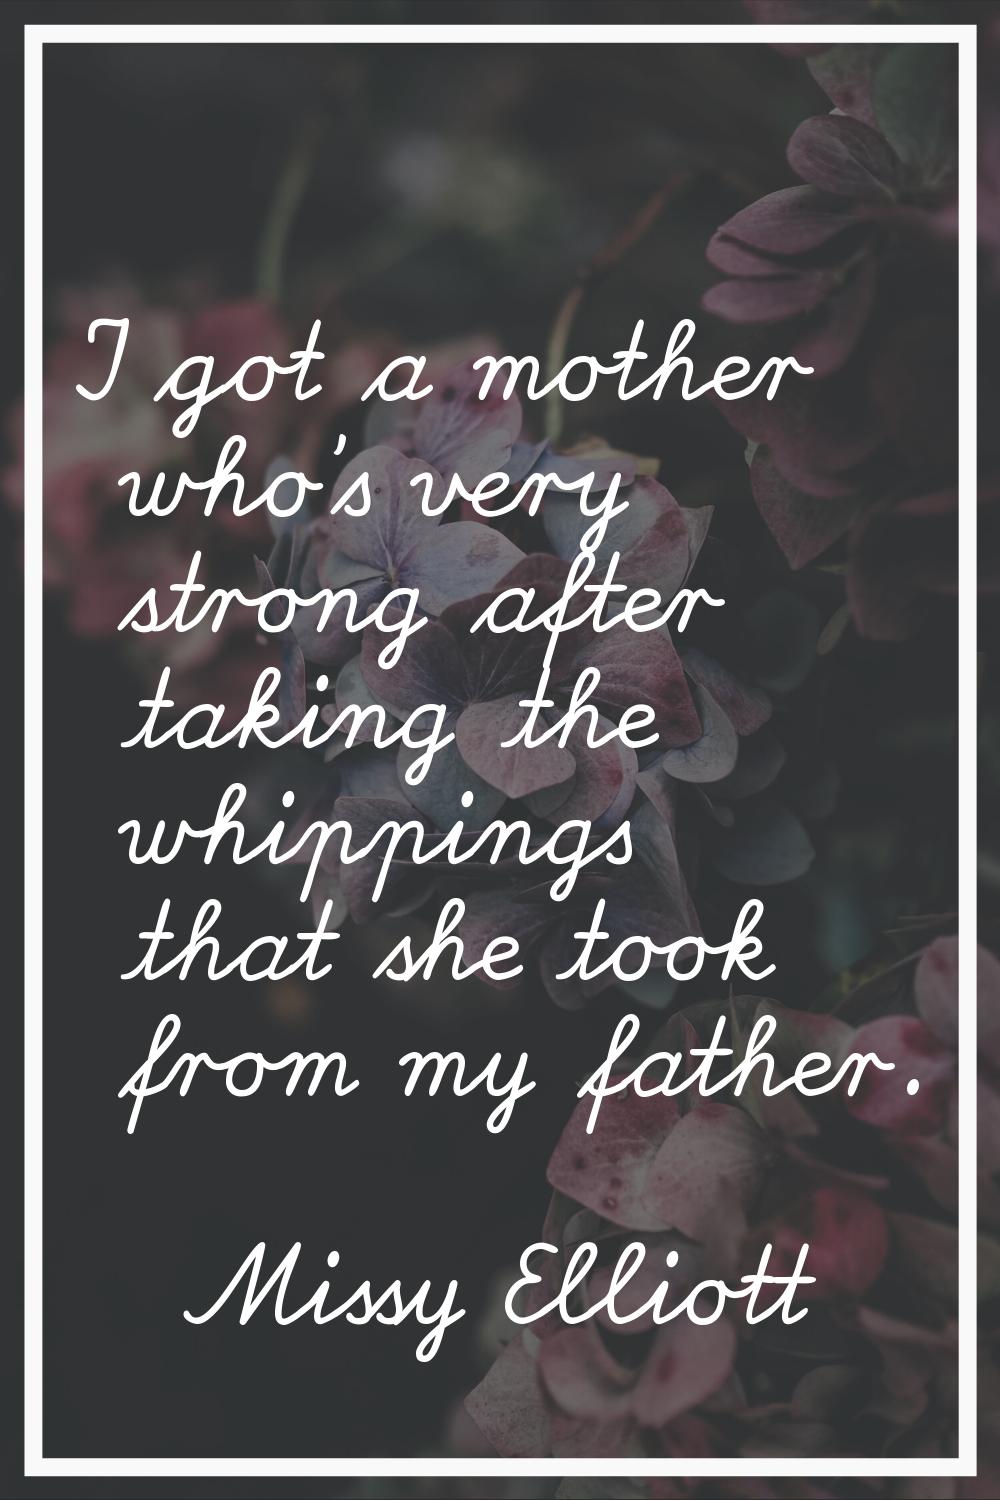 I got a mother who's very strong after taking the whippings that she took from my father.